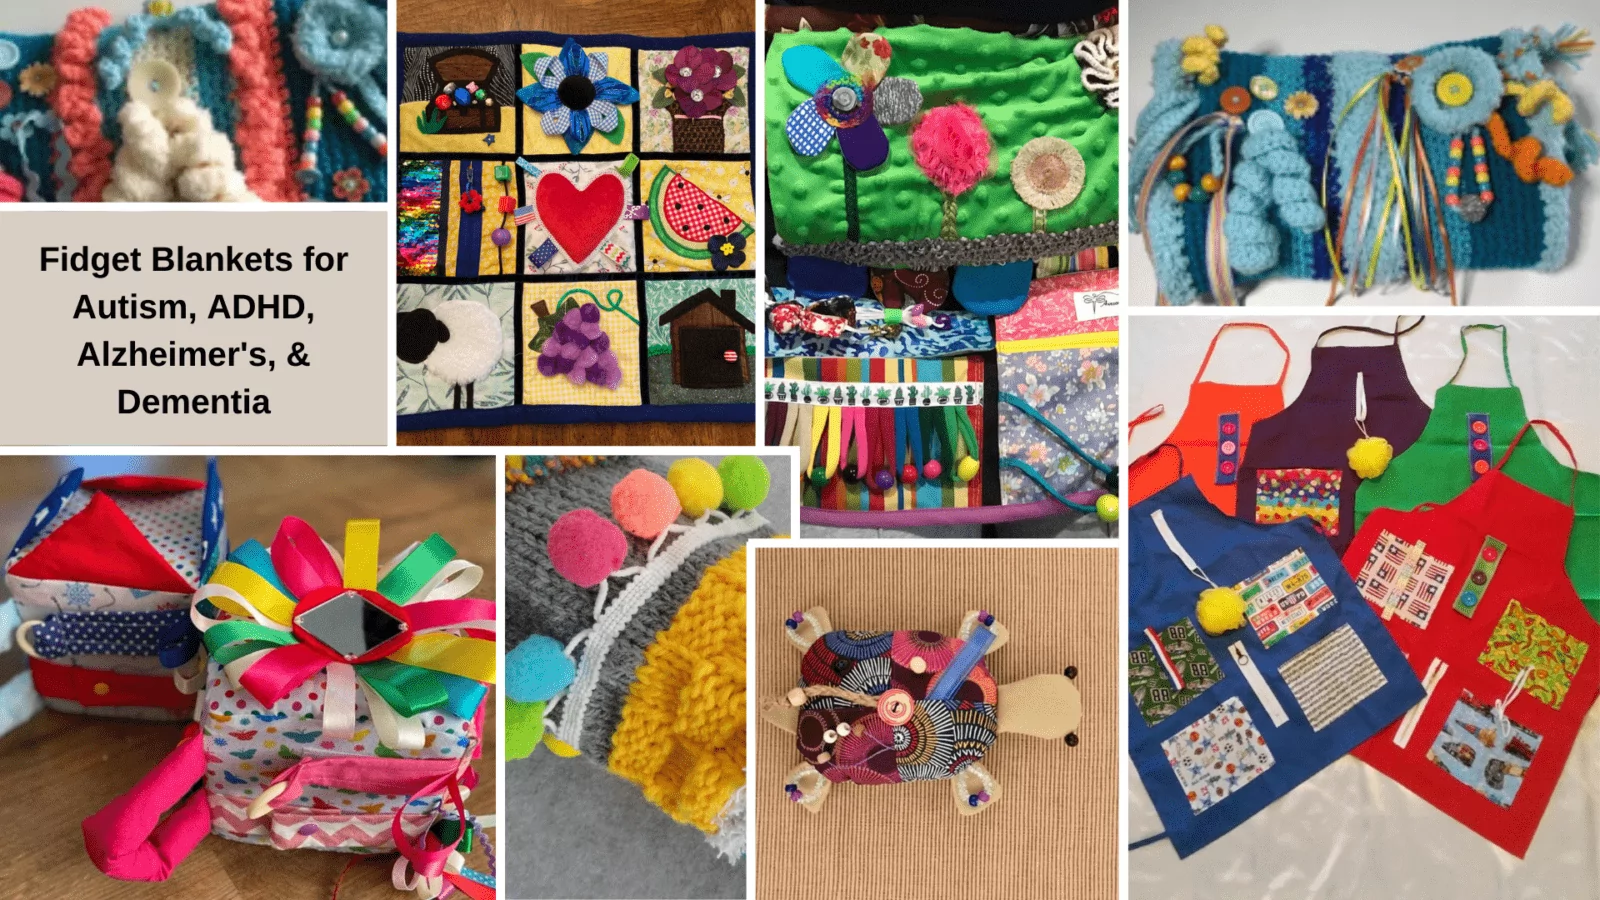 Fidget blankets and aprons for people with autism, ADHD, Alzheimer's disease, and dementia. Collage of activity pads, fiddle muffs, and busy boards in many colors.